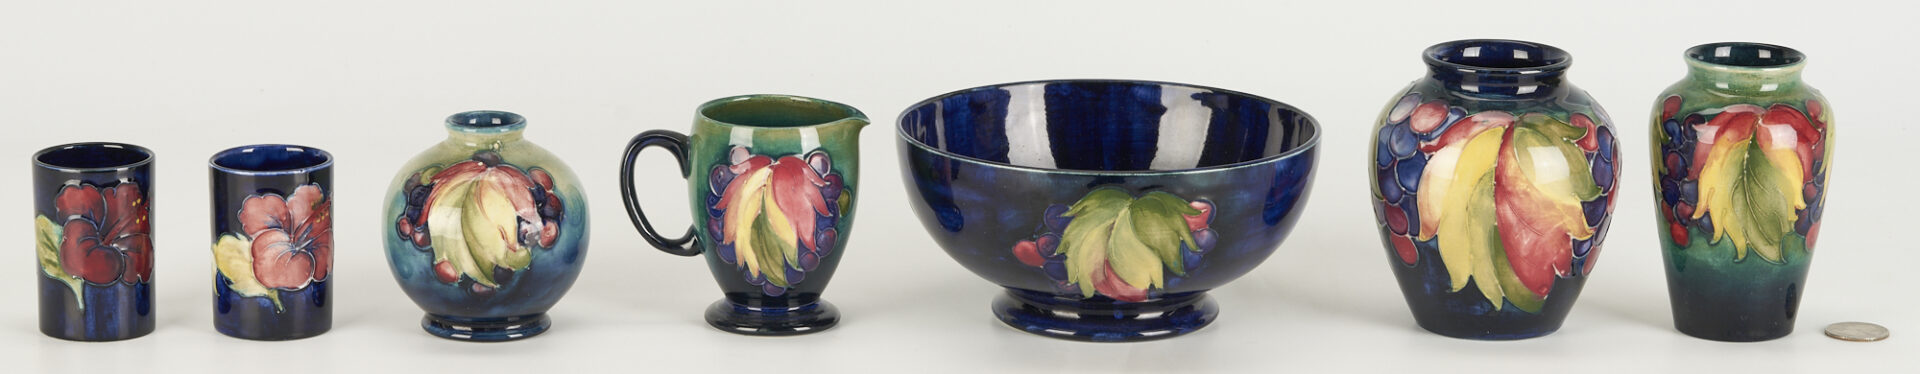 Lot 458: 7 Moorcroft Pottery Items, incl. Leaf & Berry and Hibiscus